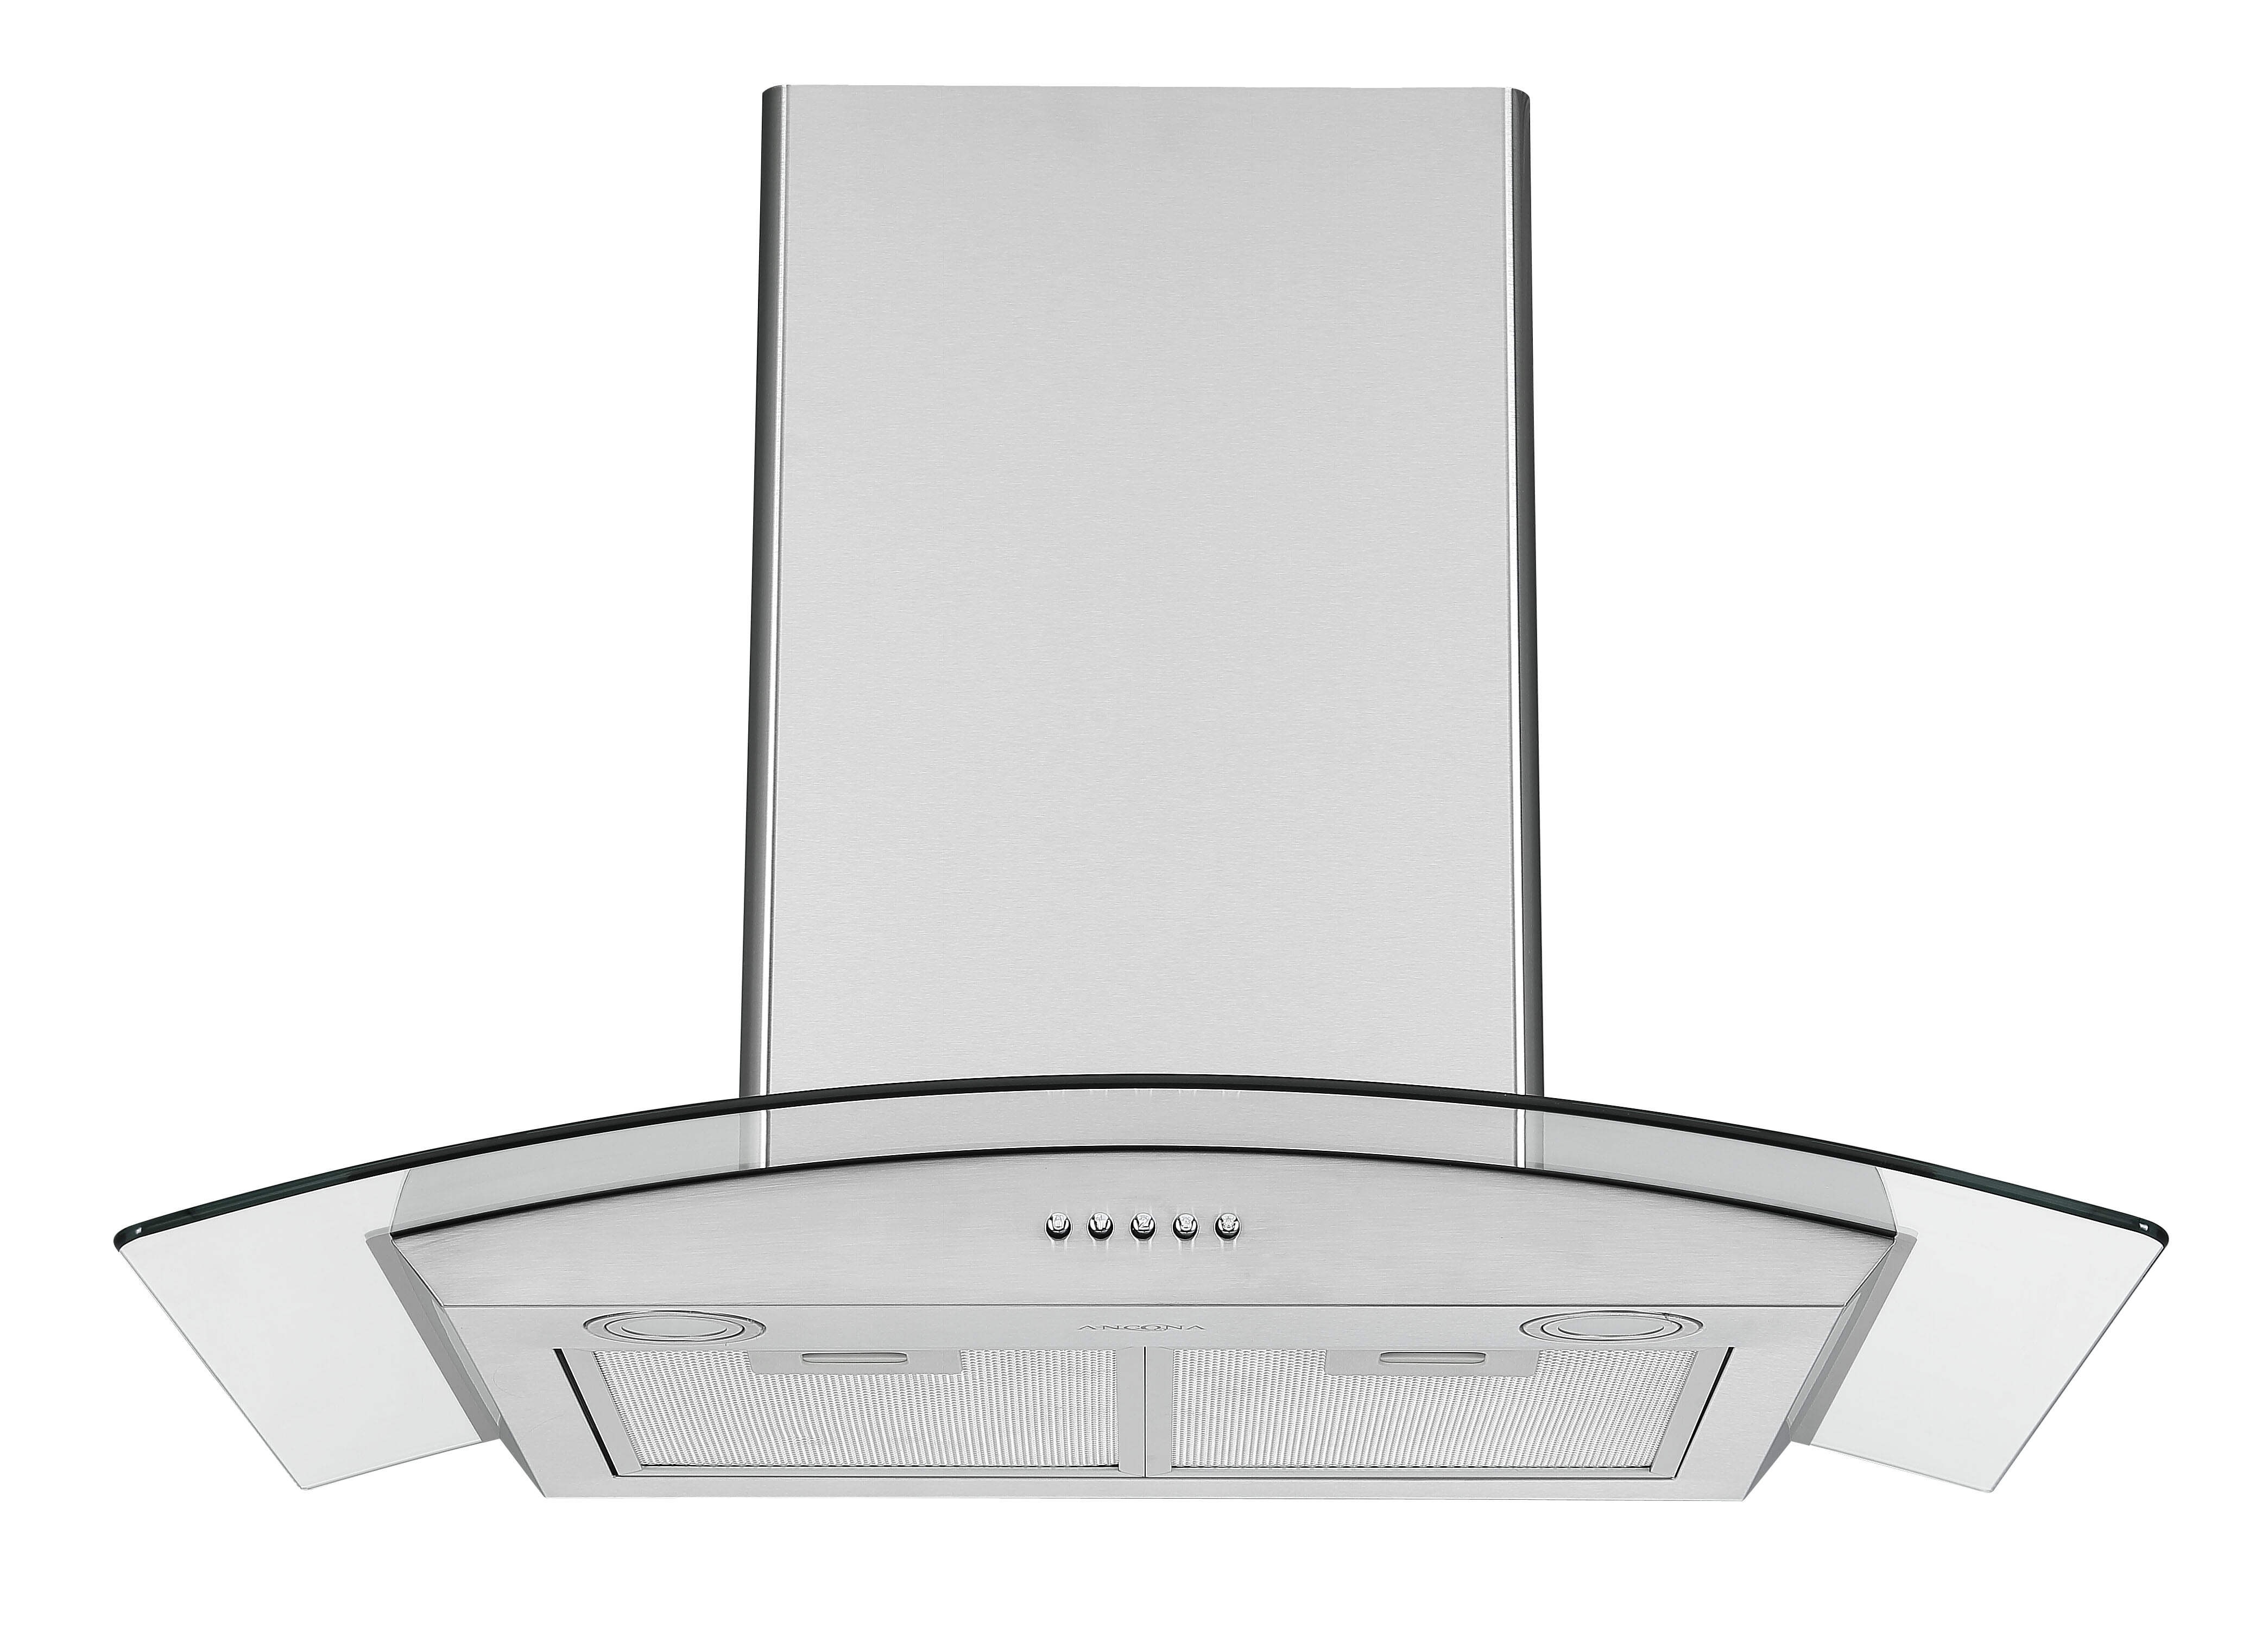 30 in Convertible Wall Mounted Glass  Canopy  Range Hood  in 